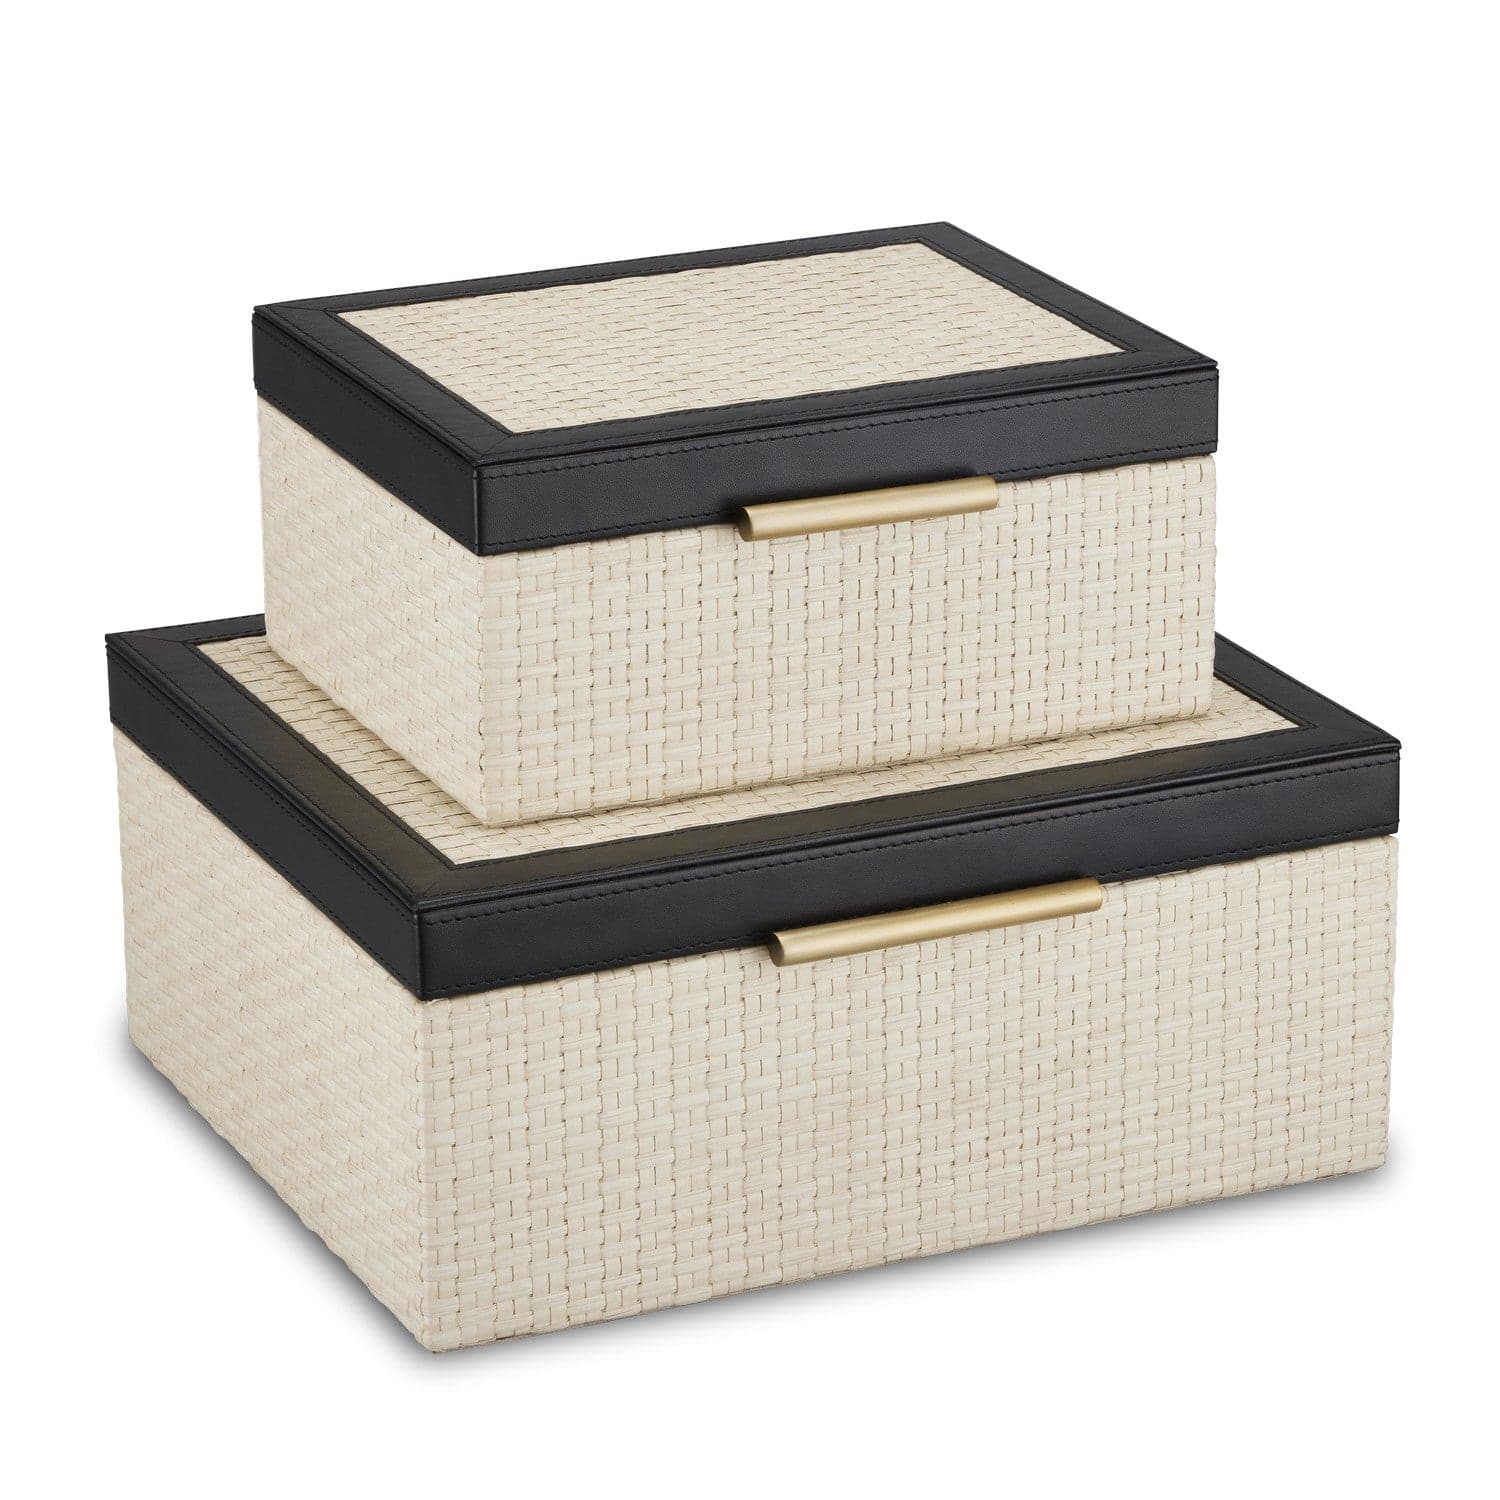 Currey and Company - 1200-0668 - Box Set of 2 - Ivory/Black/Light Antique Brass/Beige